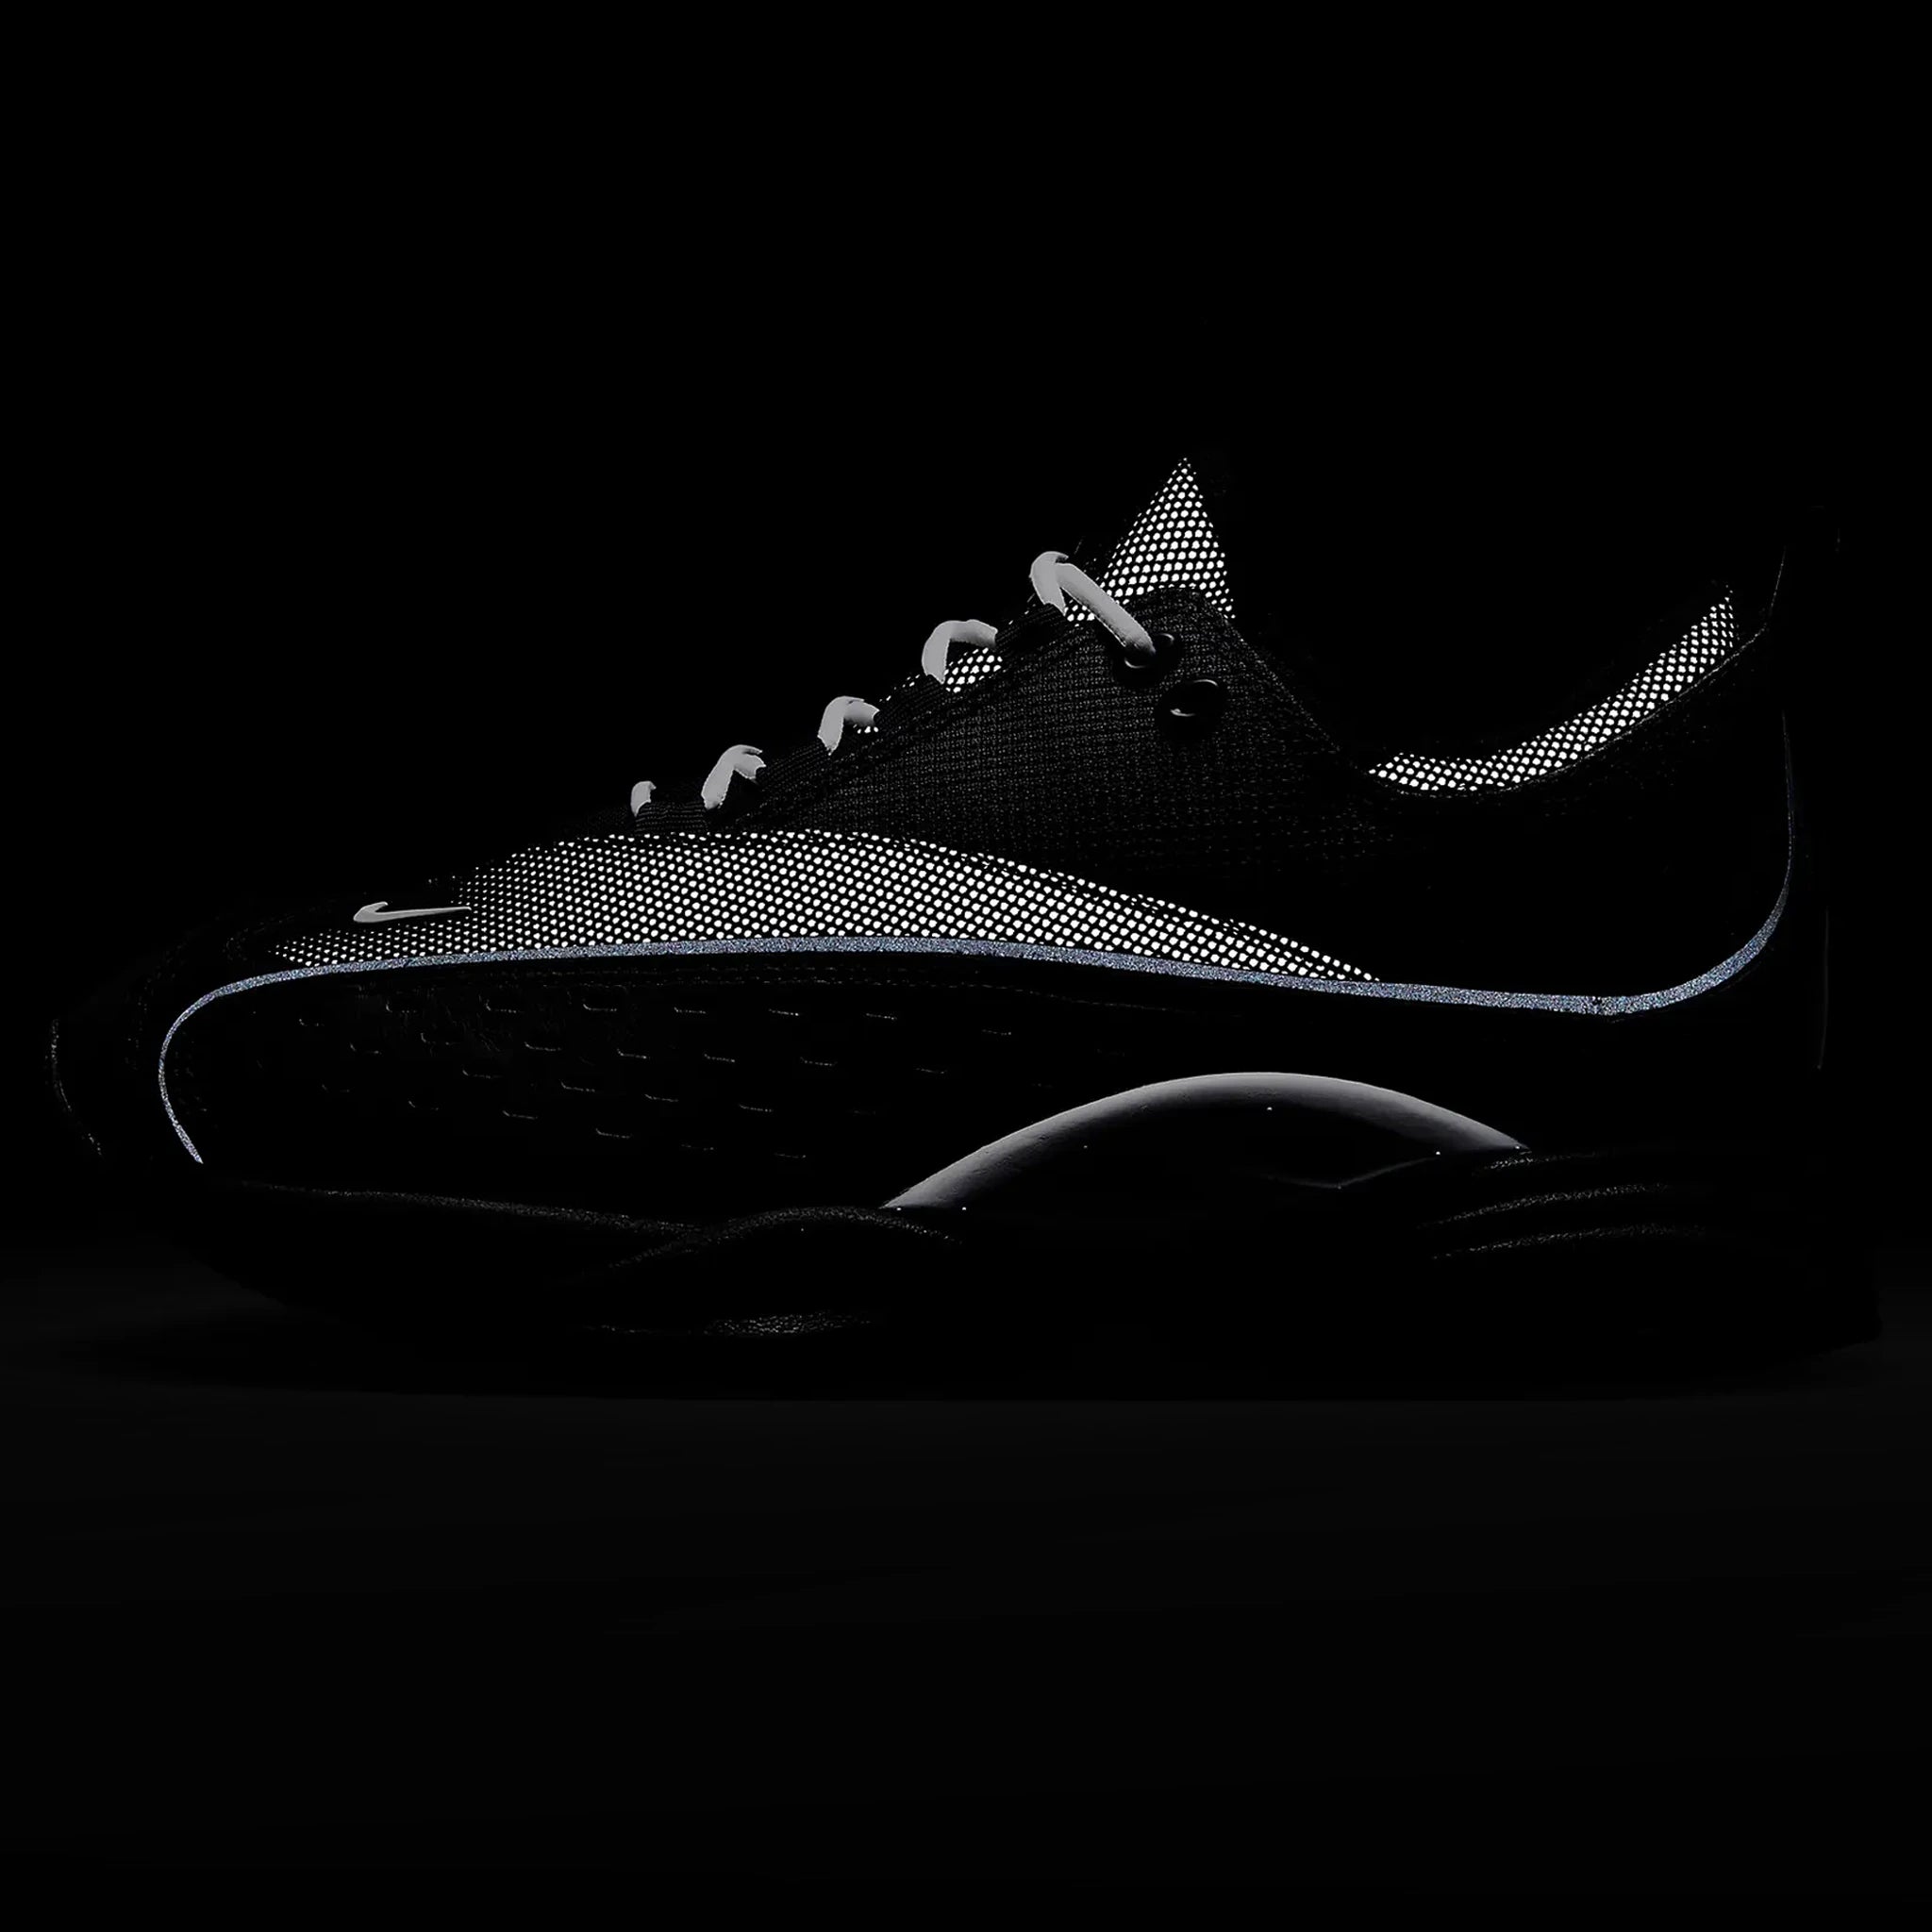 Reflective view of Nike x NOCTA Air Zoom Drive Black White